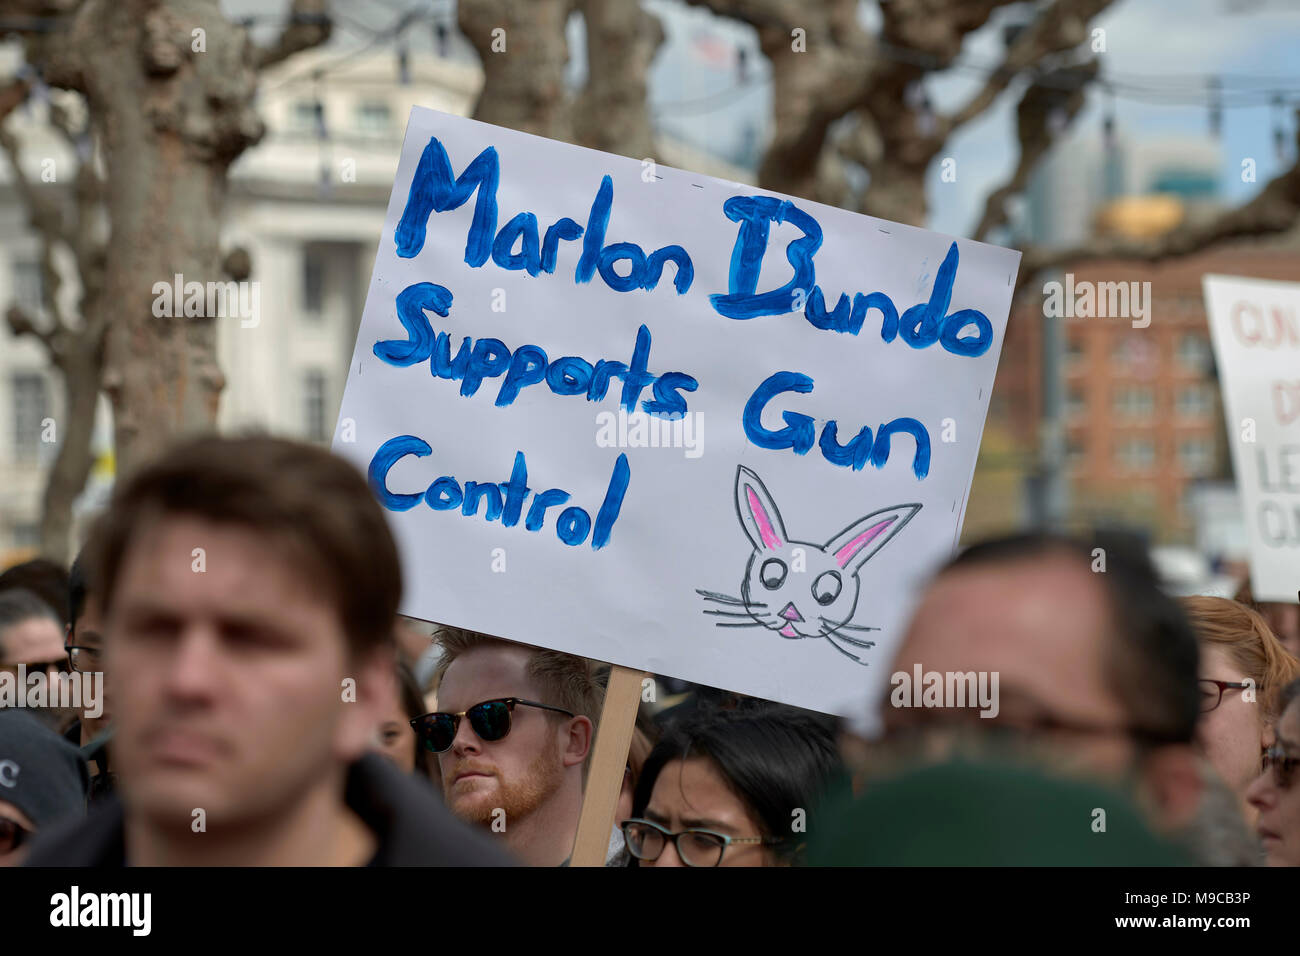 San Francisco, USA. 24th March, 2018. A sign references Marlon Bundo, a bunny belonging to US Vice President Mike Pence and satirized by British comedian John Oliver, during a demonstration against gun violence in the March For Our Lives in San Francisco, USA. Credit: Paul Jeffrey/Alamy Live News Stock Photo